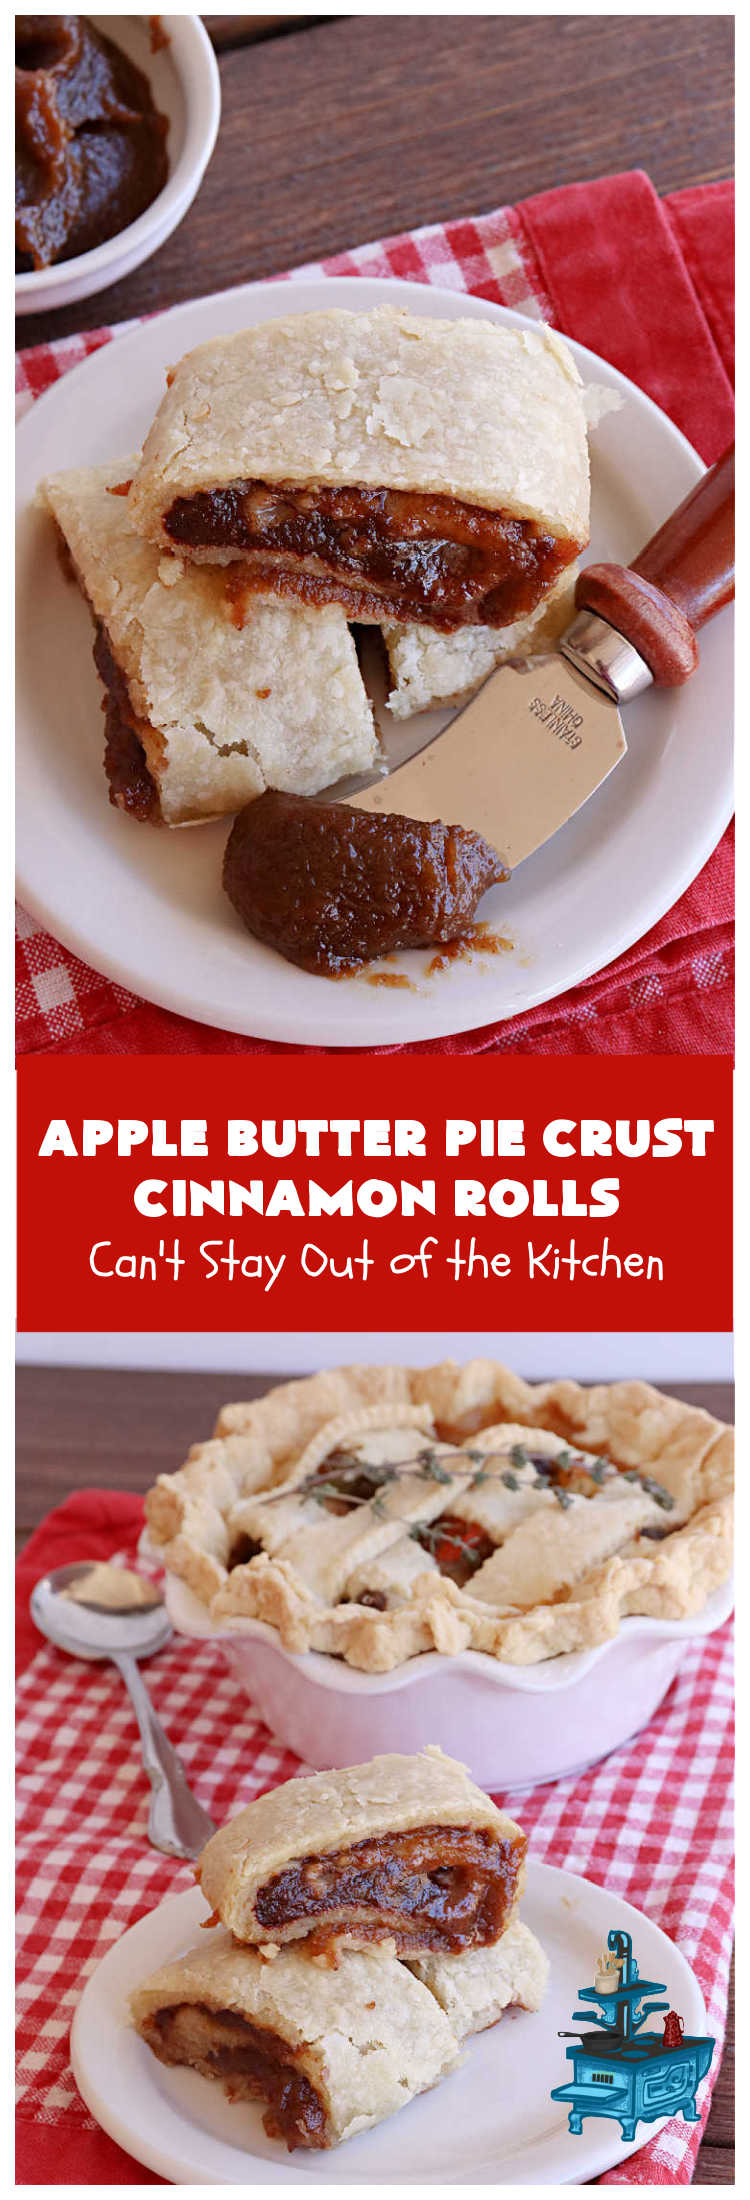 Apple Butter Pie Crust Cinnamon Rolls | Can't Stay Out of the Kitchen | these spectacular #CinnamonRolls are absolutely breathtaking! They're made from #PieCrust and filled with #AppleButter & #cinnamon. Great for #breakfast, snacks or for #dessert. Every bite will rock your world! #apples #PieCrustCinnamonRolls #HolidayBreakfast #AppleButterPieCrustCinnamonRolls